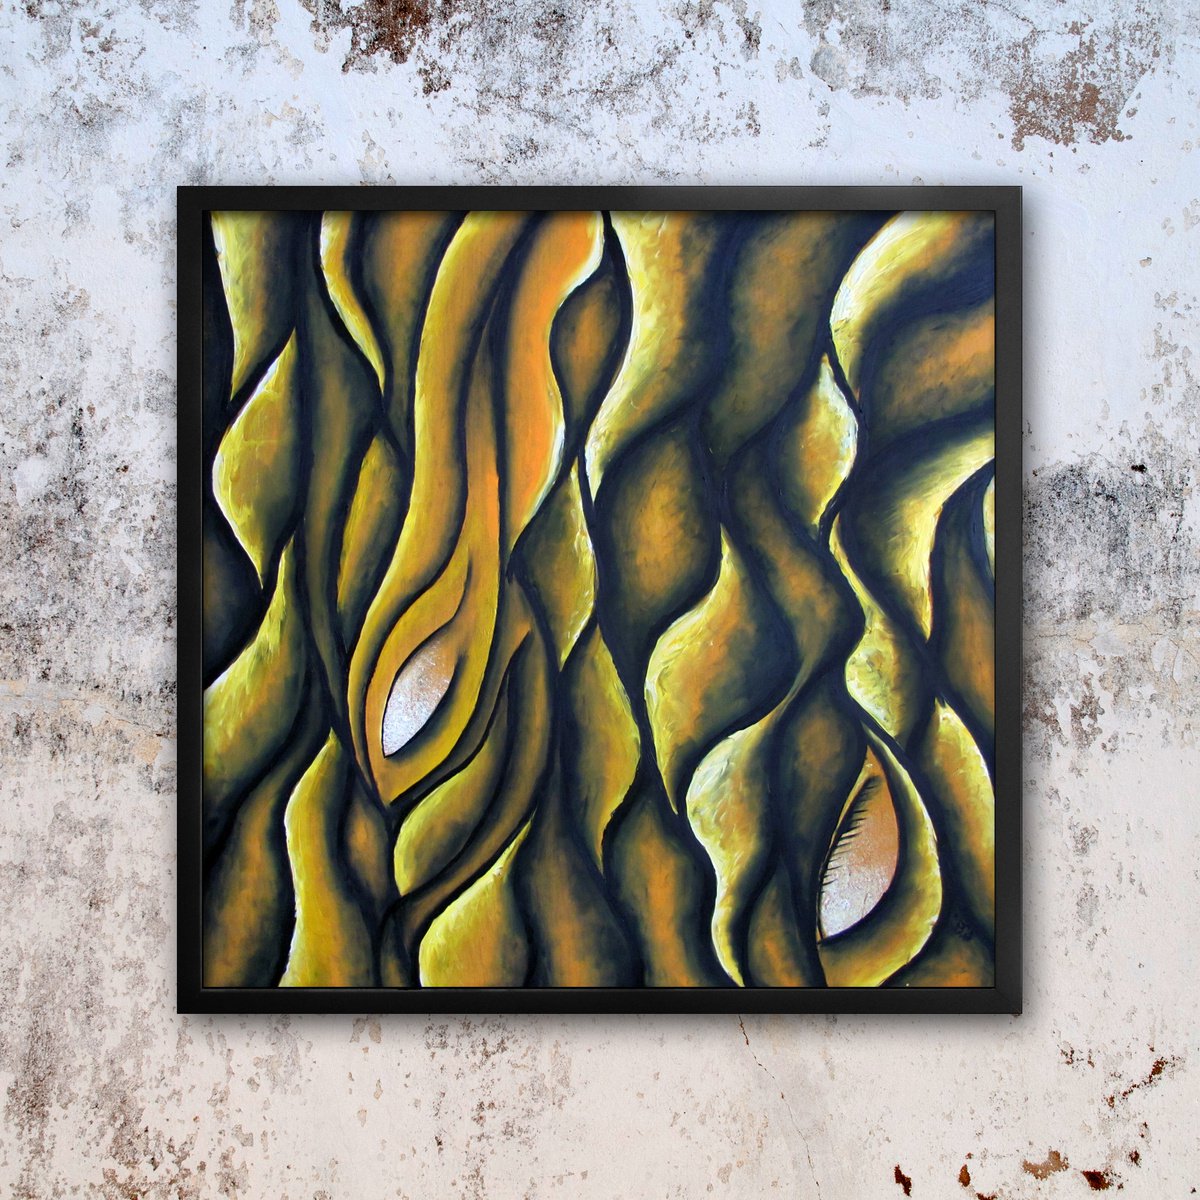 Amarillo - Original Abstract PMS Oil Painting On Wood Panel - 26 x 26 inches, Framed by Preston M. Smith (PMS)